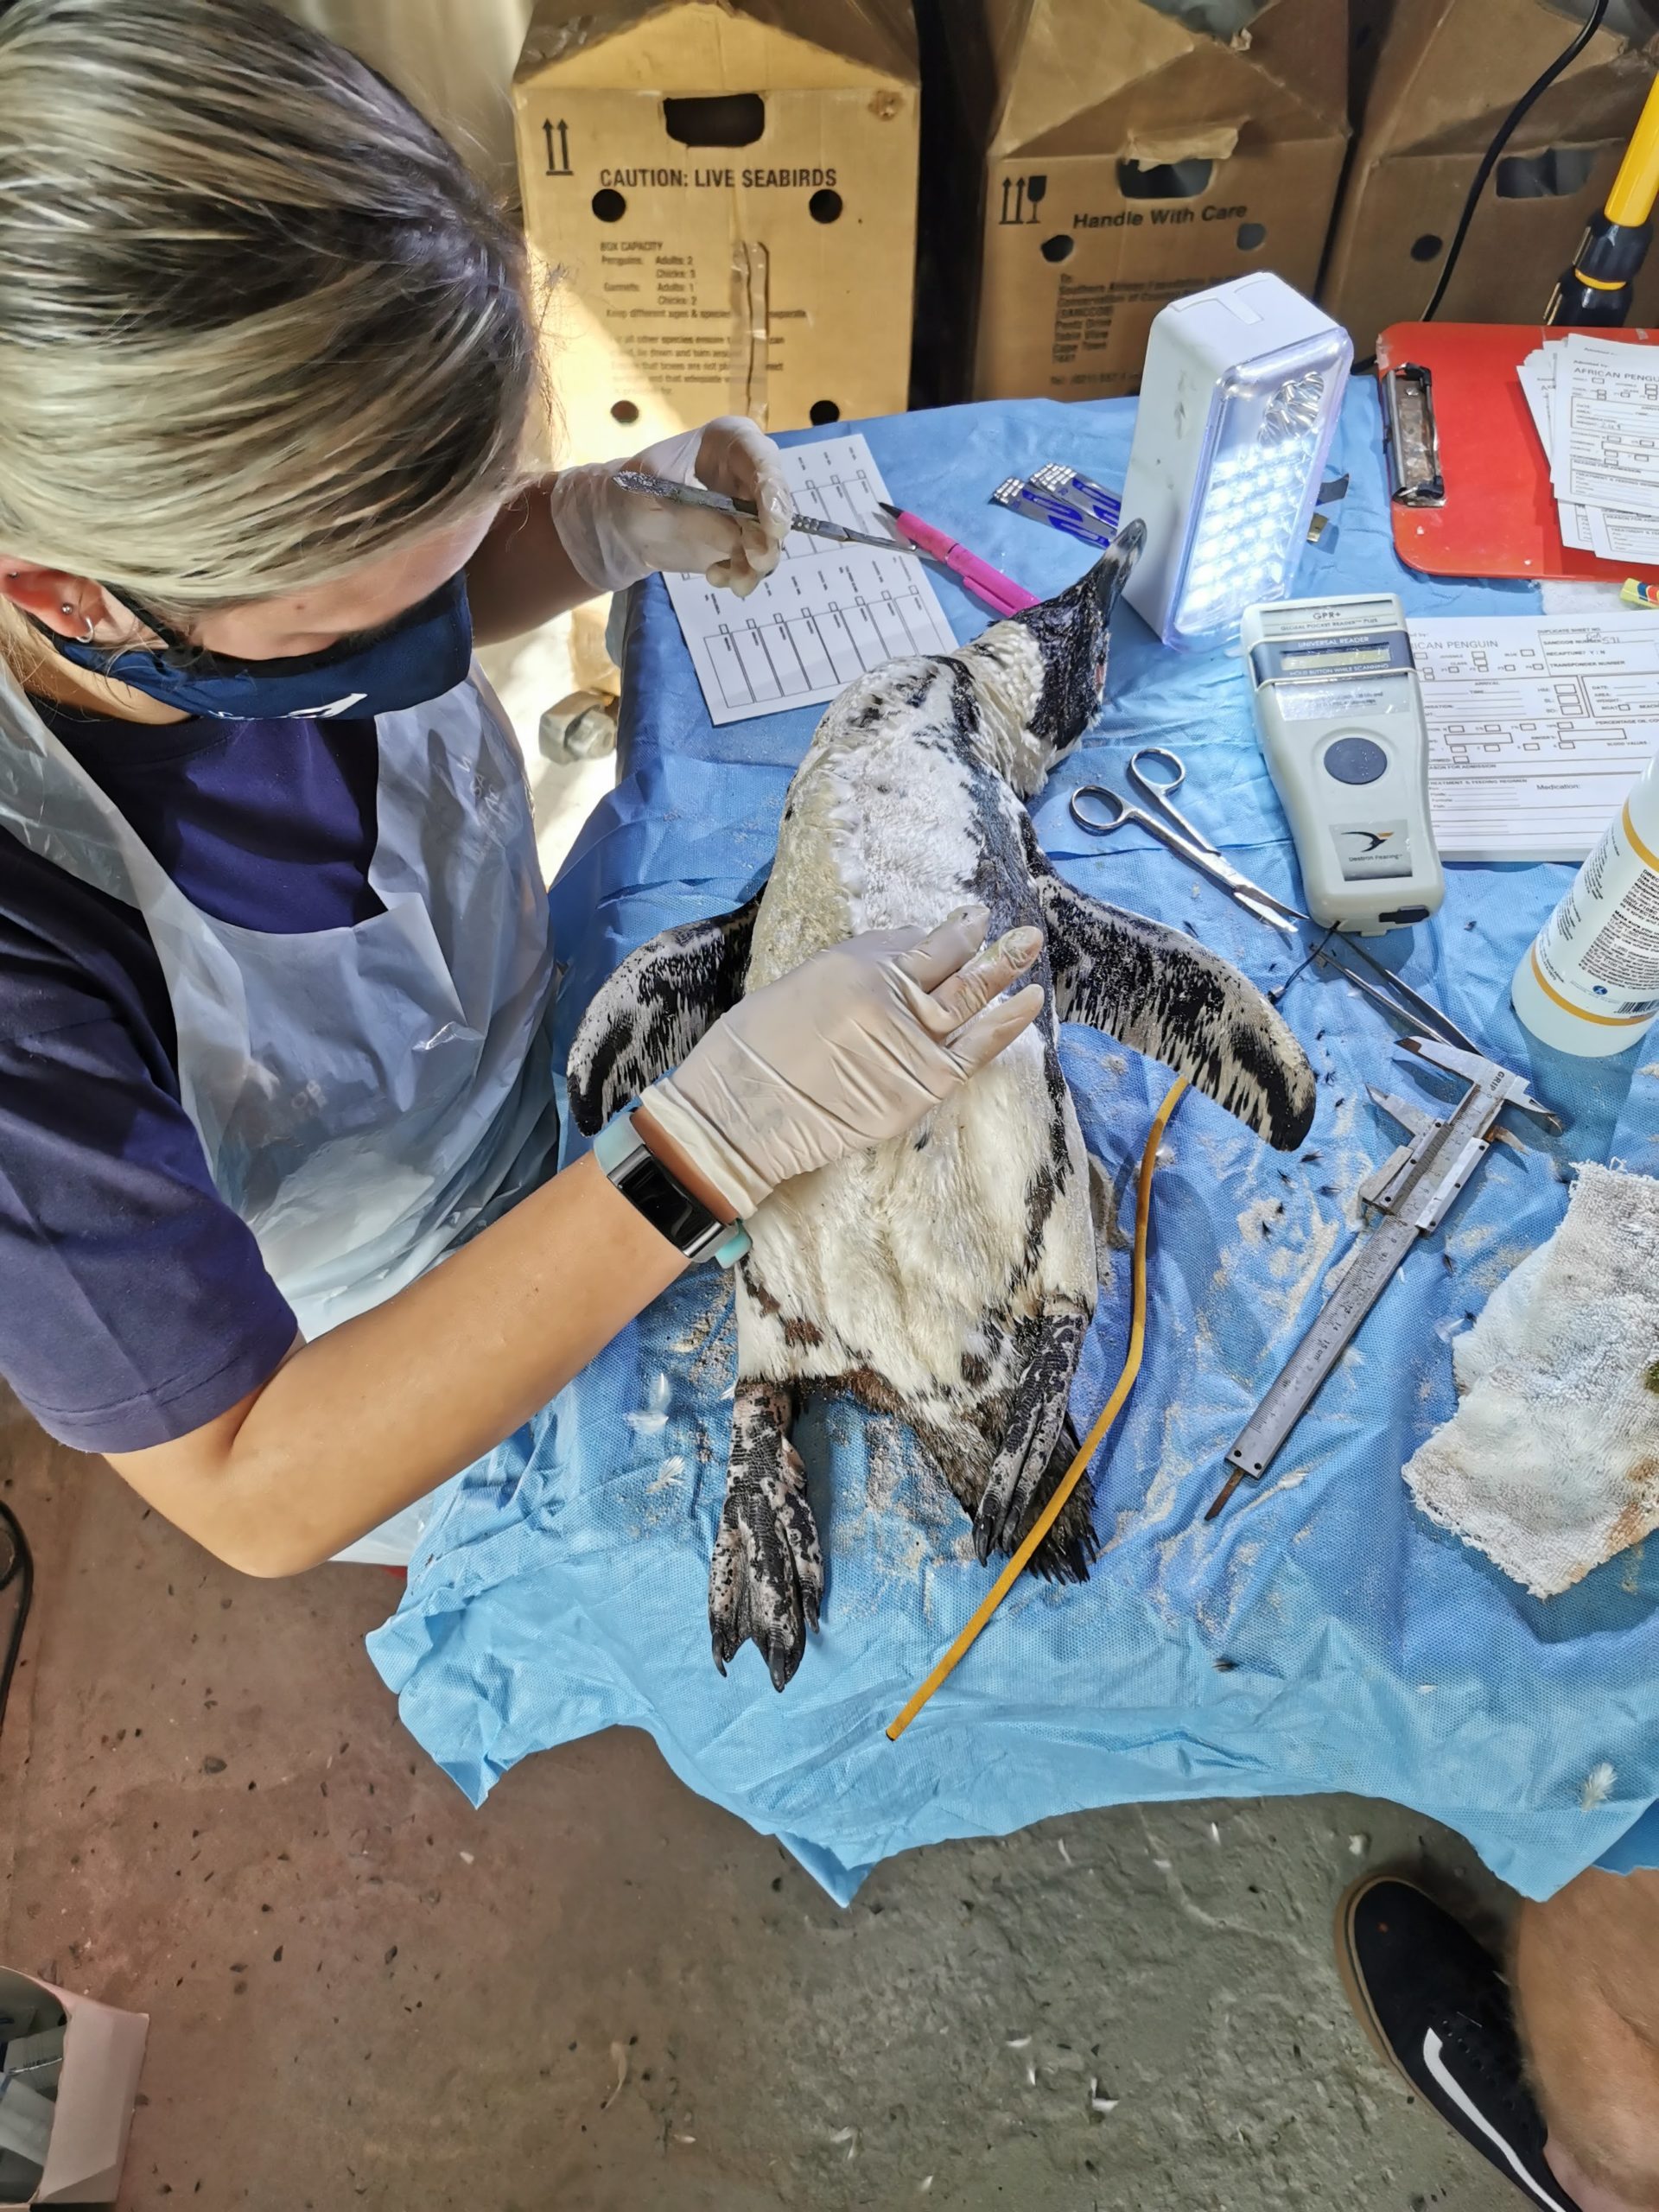 penguin getting treated by female doctor after getting stung by bees in the eyes.